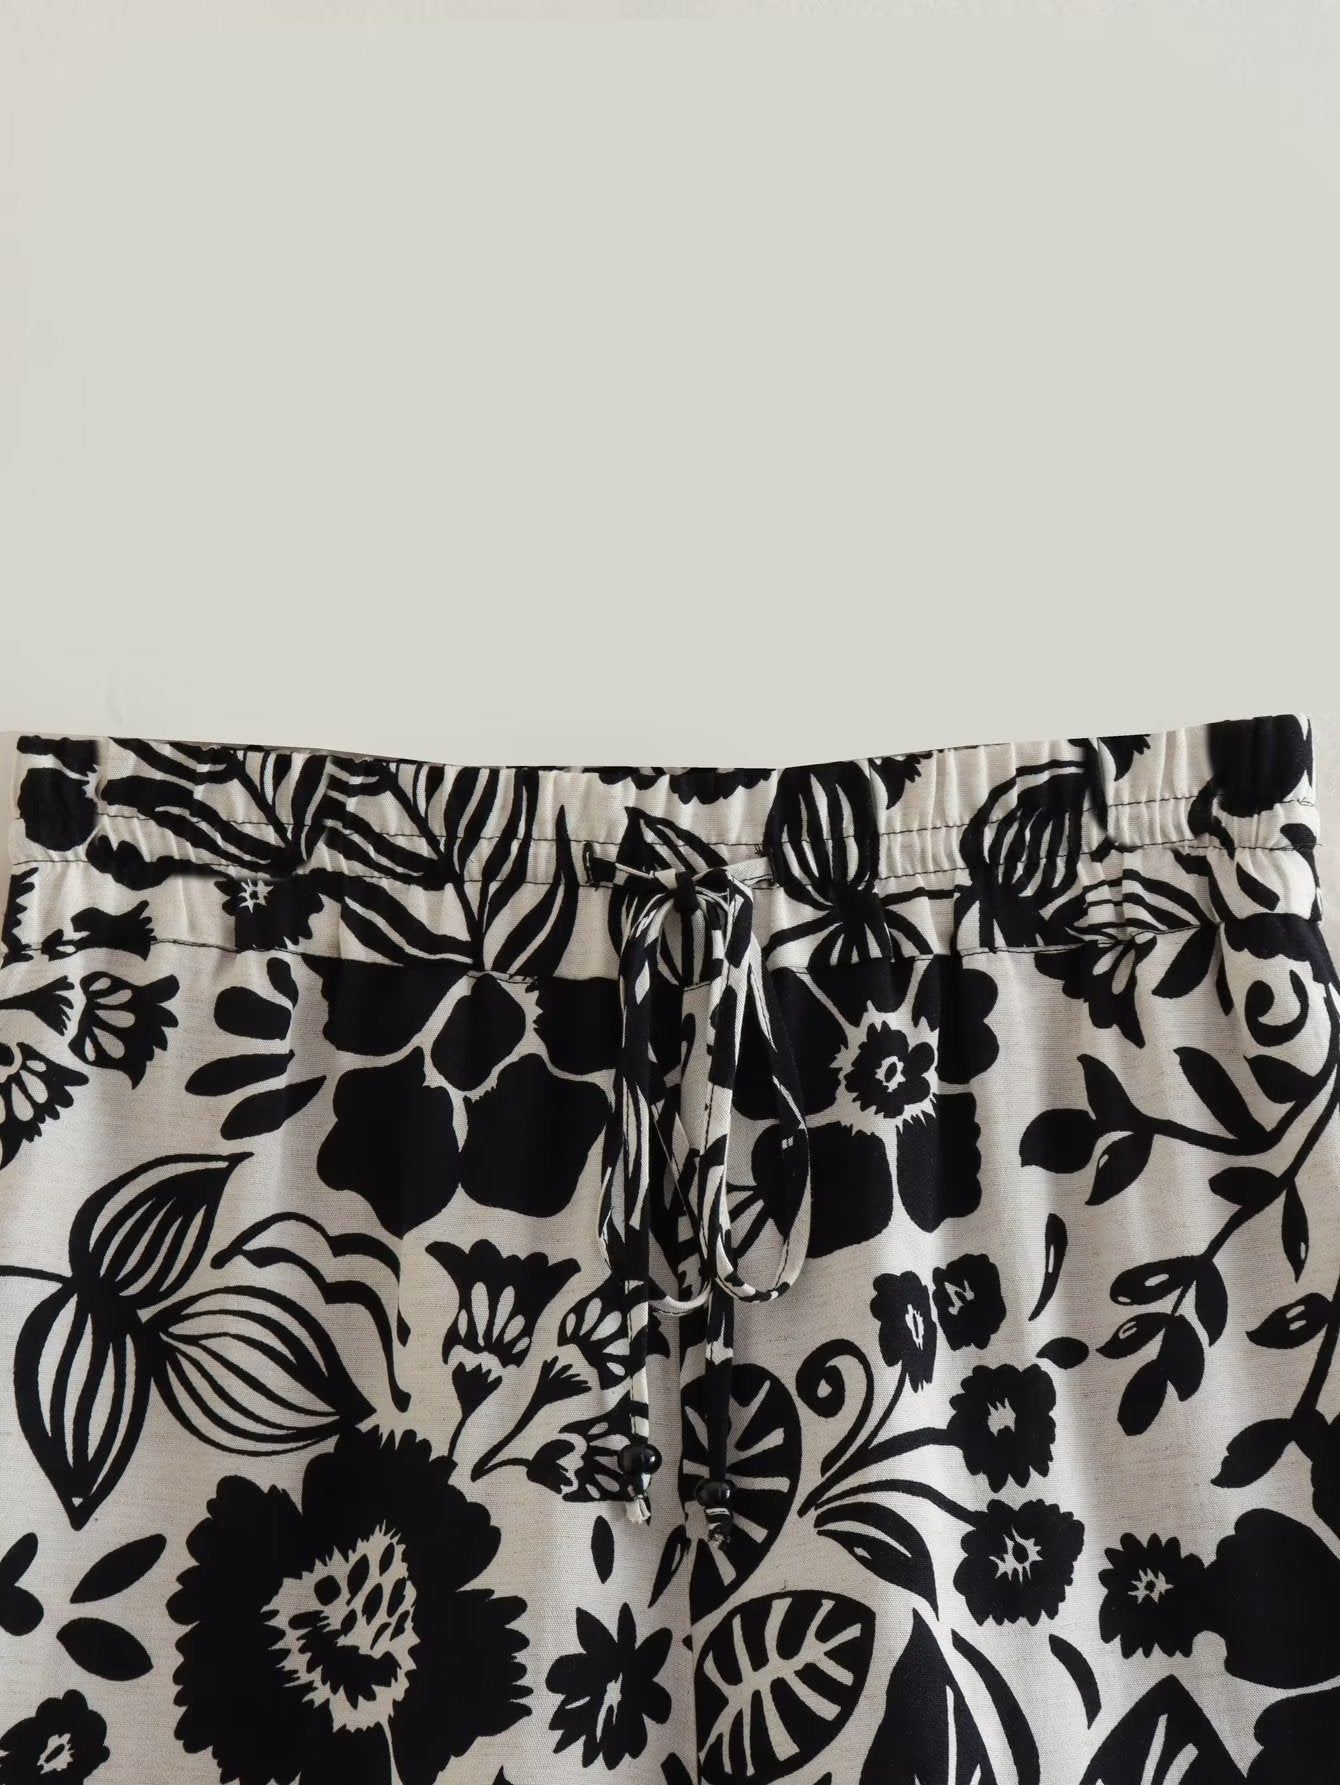 2023 Summer Fashion Trends | Black & White Contrast Floral Crop Top Shorts Outfit 2-piece Set